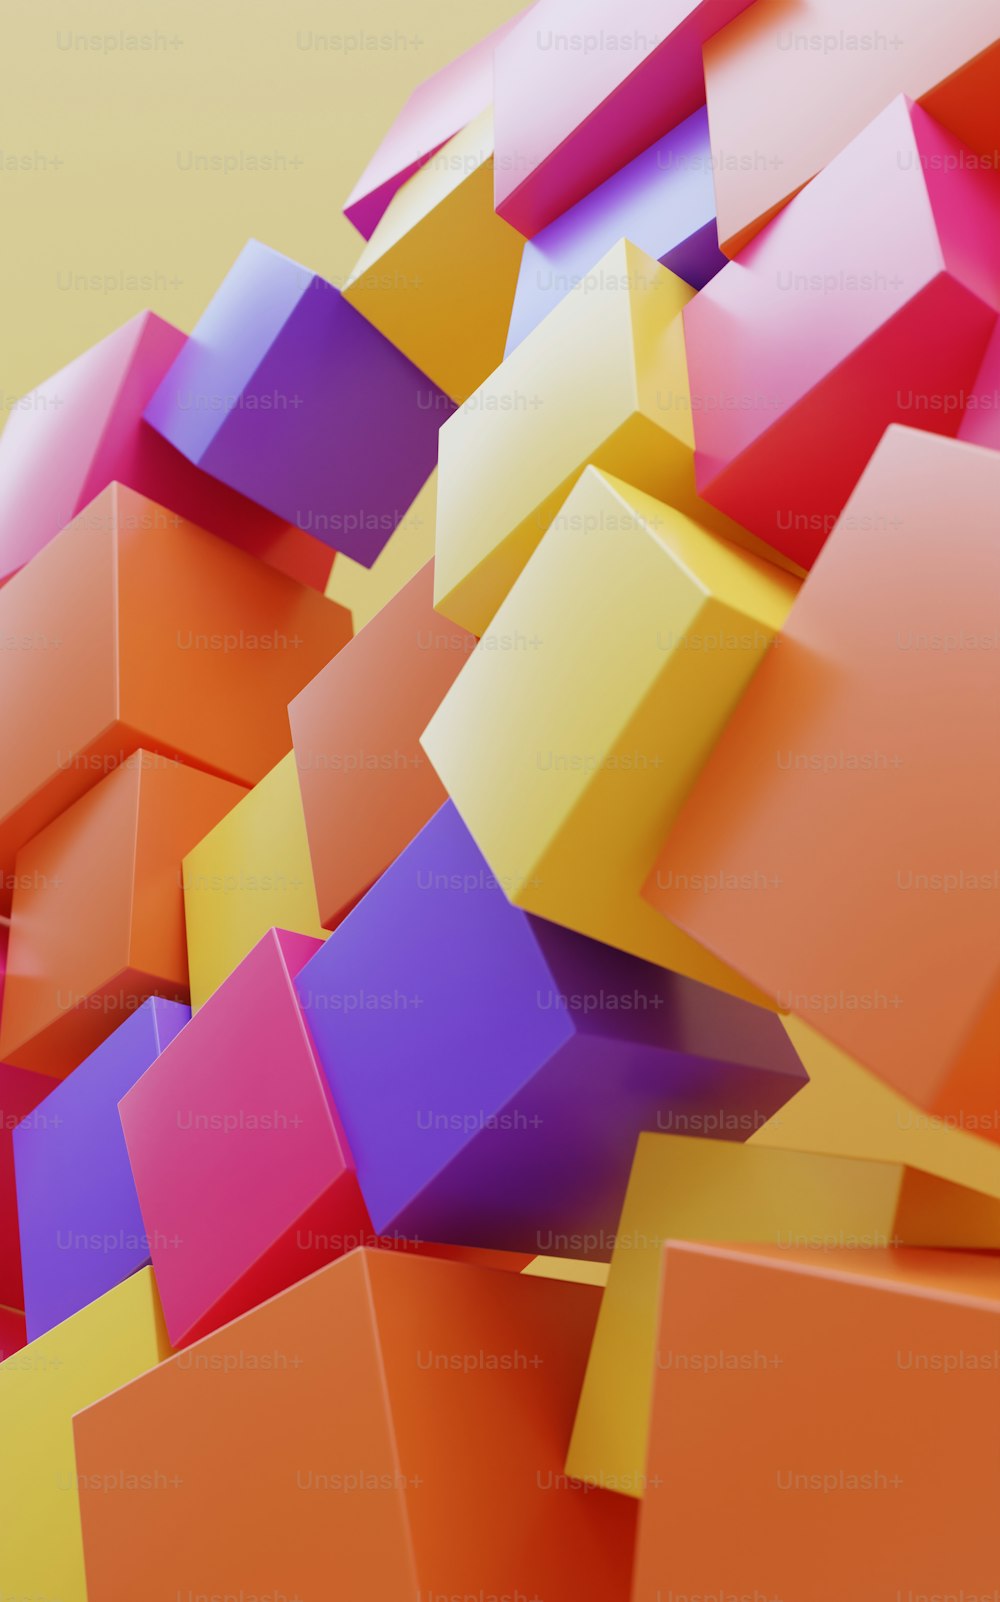 a bunch of different colored cubes on a yellow background